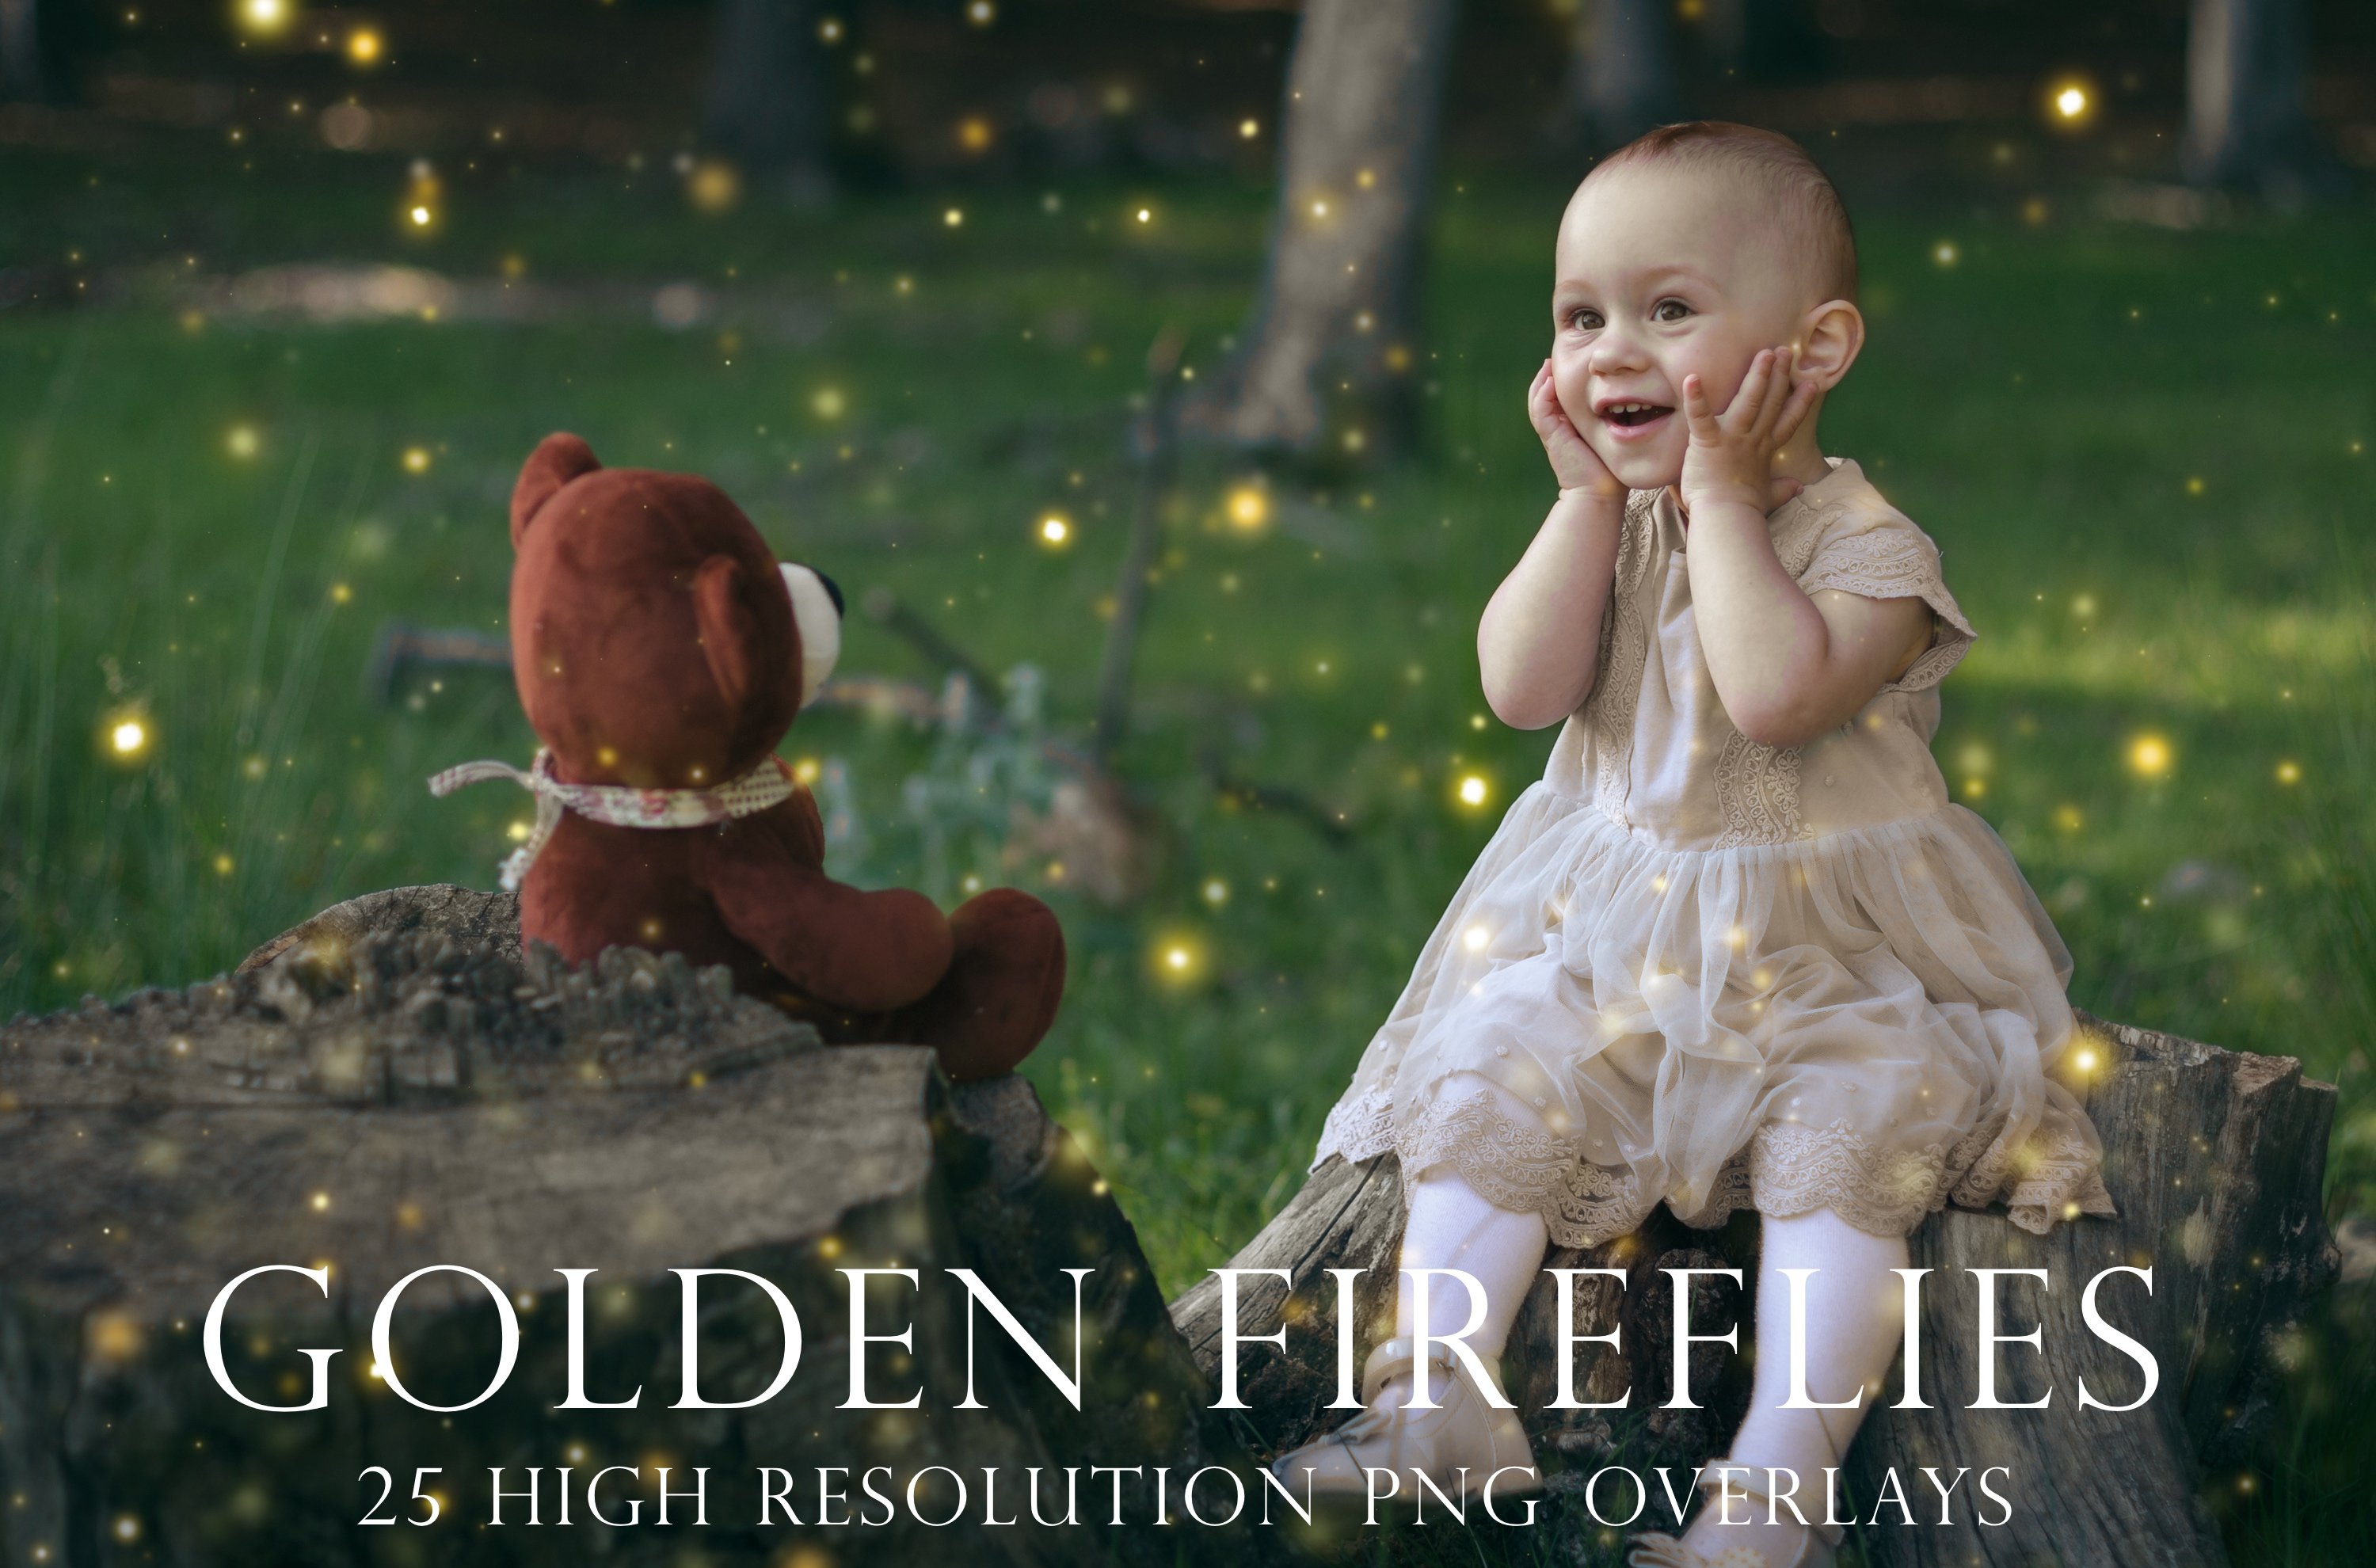 Golden firefly overlayscover image.